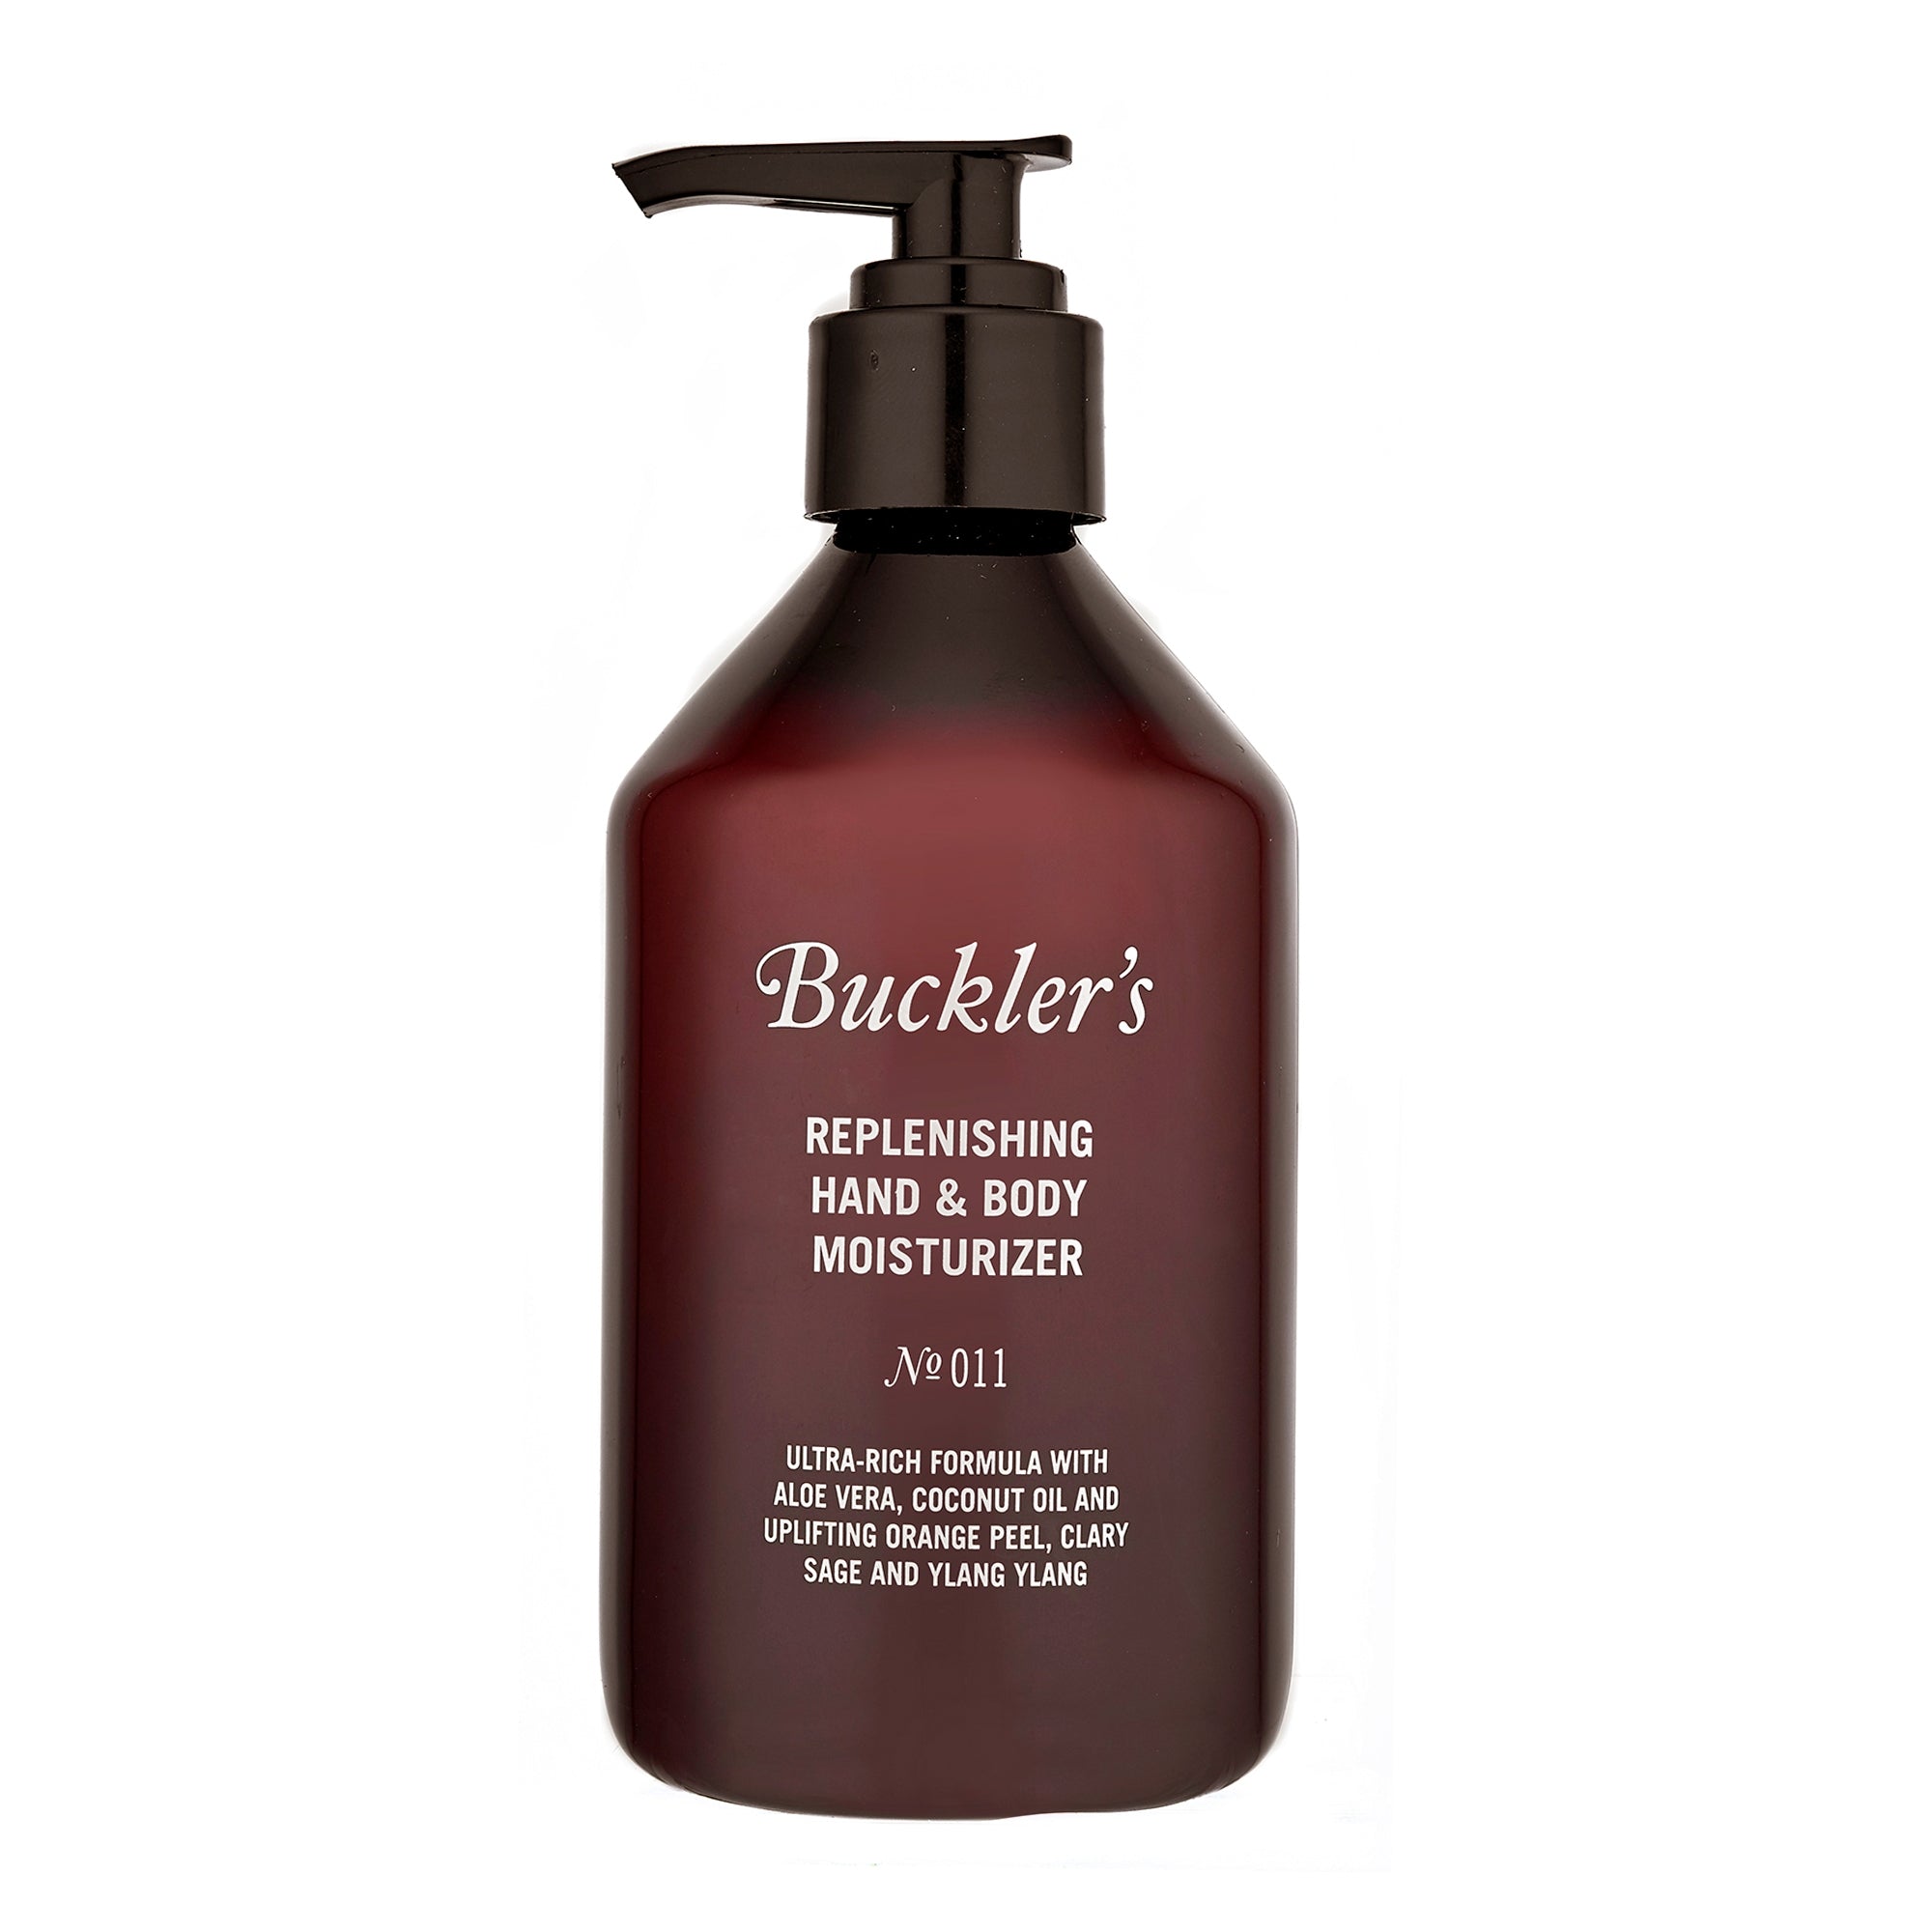 The Buckler's Replenishing Hand & Body Moisturizer in a red wine-colored bottle with a black pump top stands against a white background.